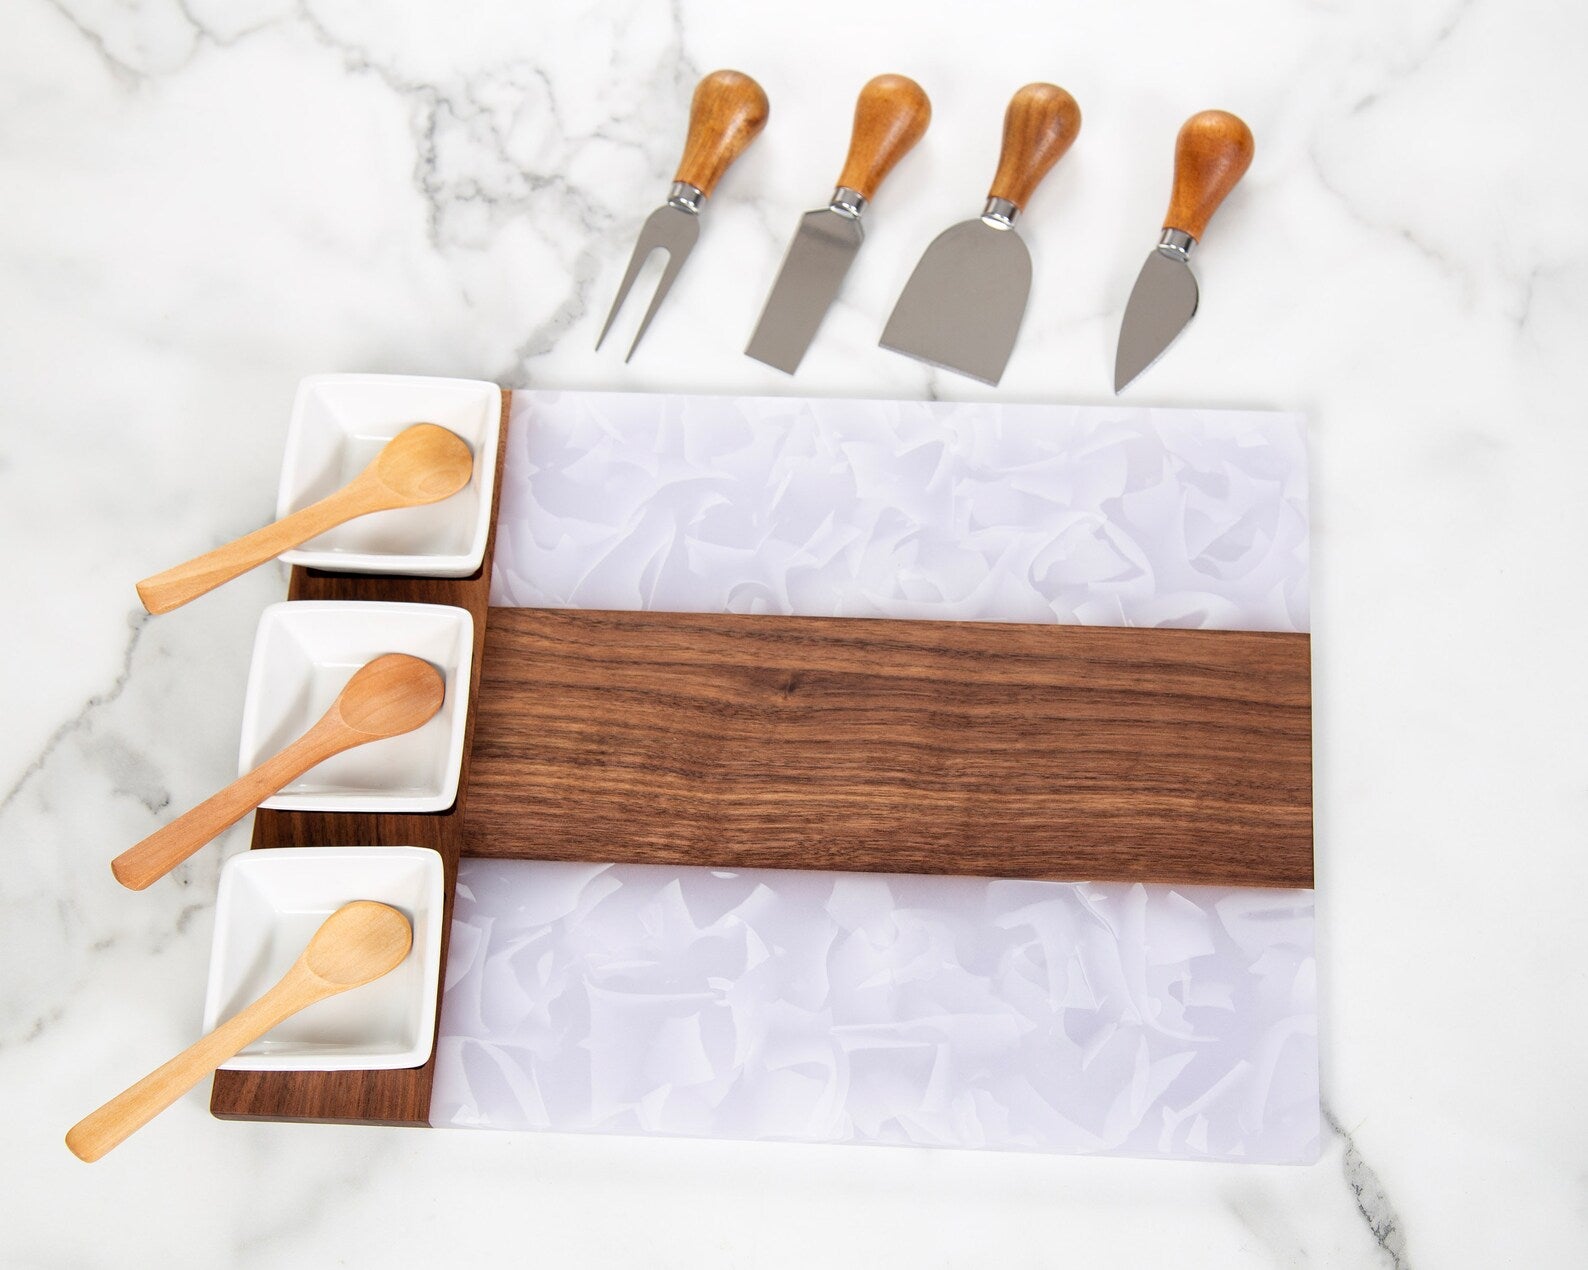 Indulge in the luxury of gifting the Black Walnut and white flowing design Charcuterie Board to someone special. Its timeless elegance and versatility make it the perfect present for any occasion. Imagine the joy on their face as they unwrap this stunning masterpiece, knowing that it was thoughtfully chosen just for them.